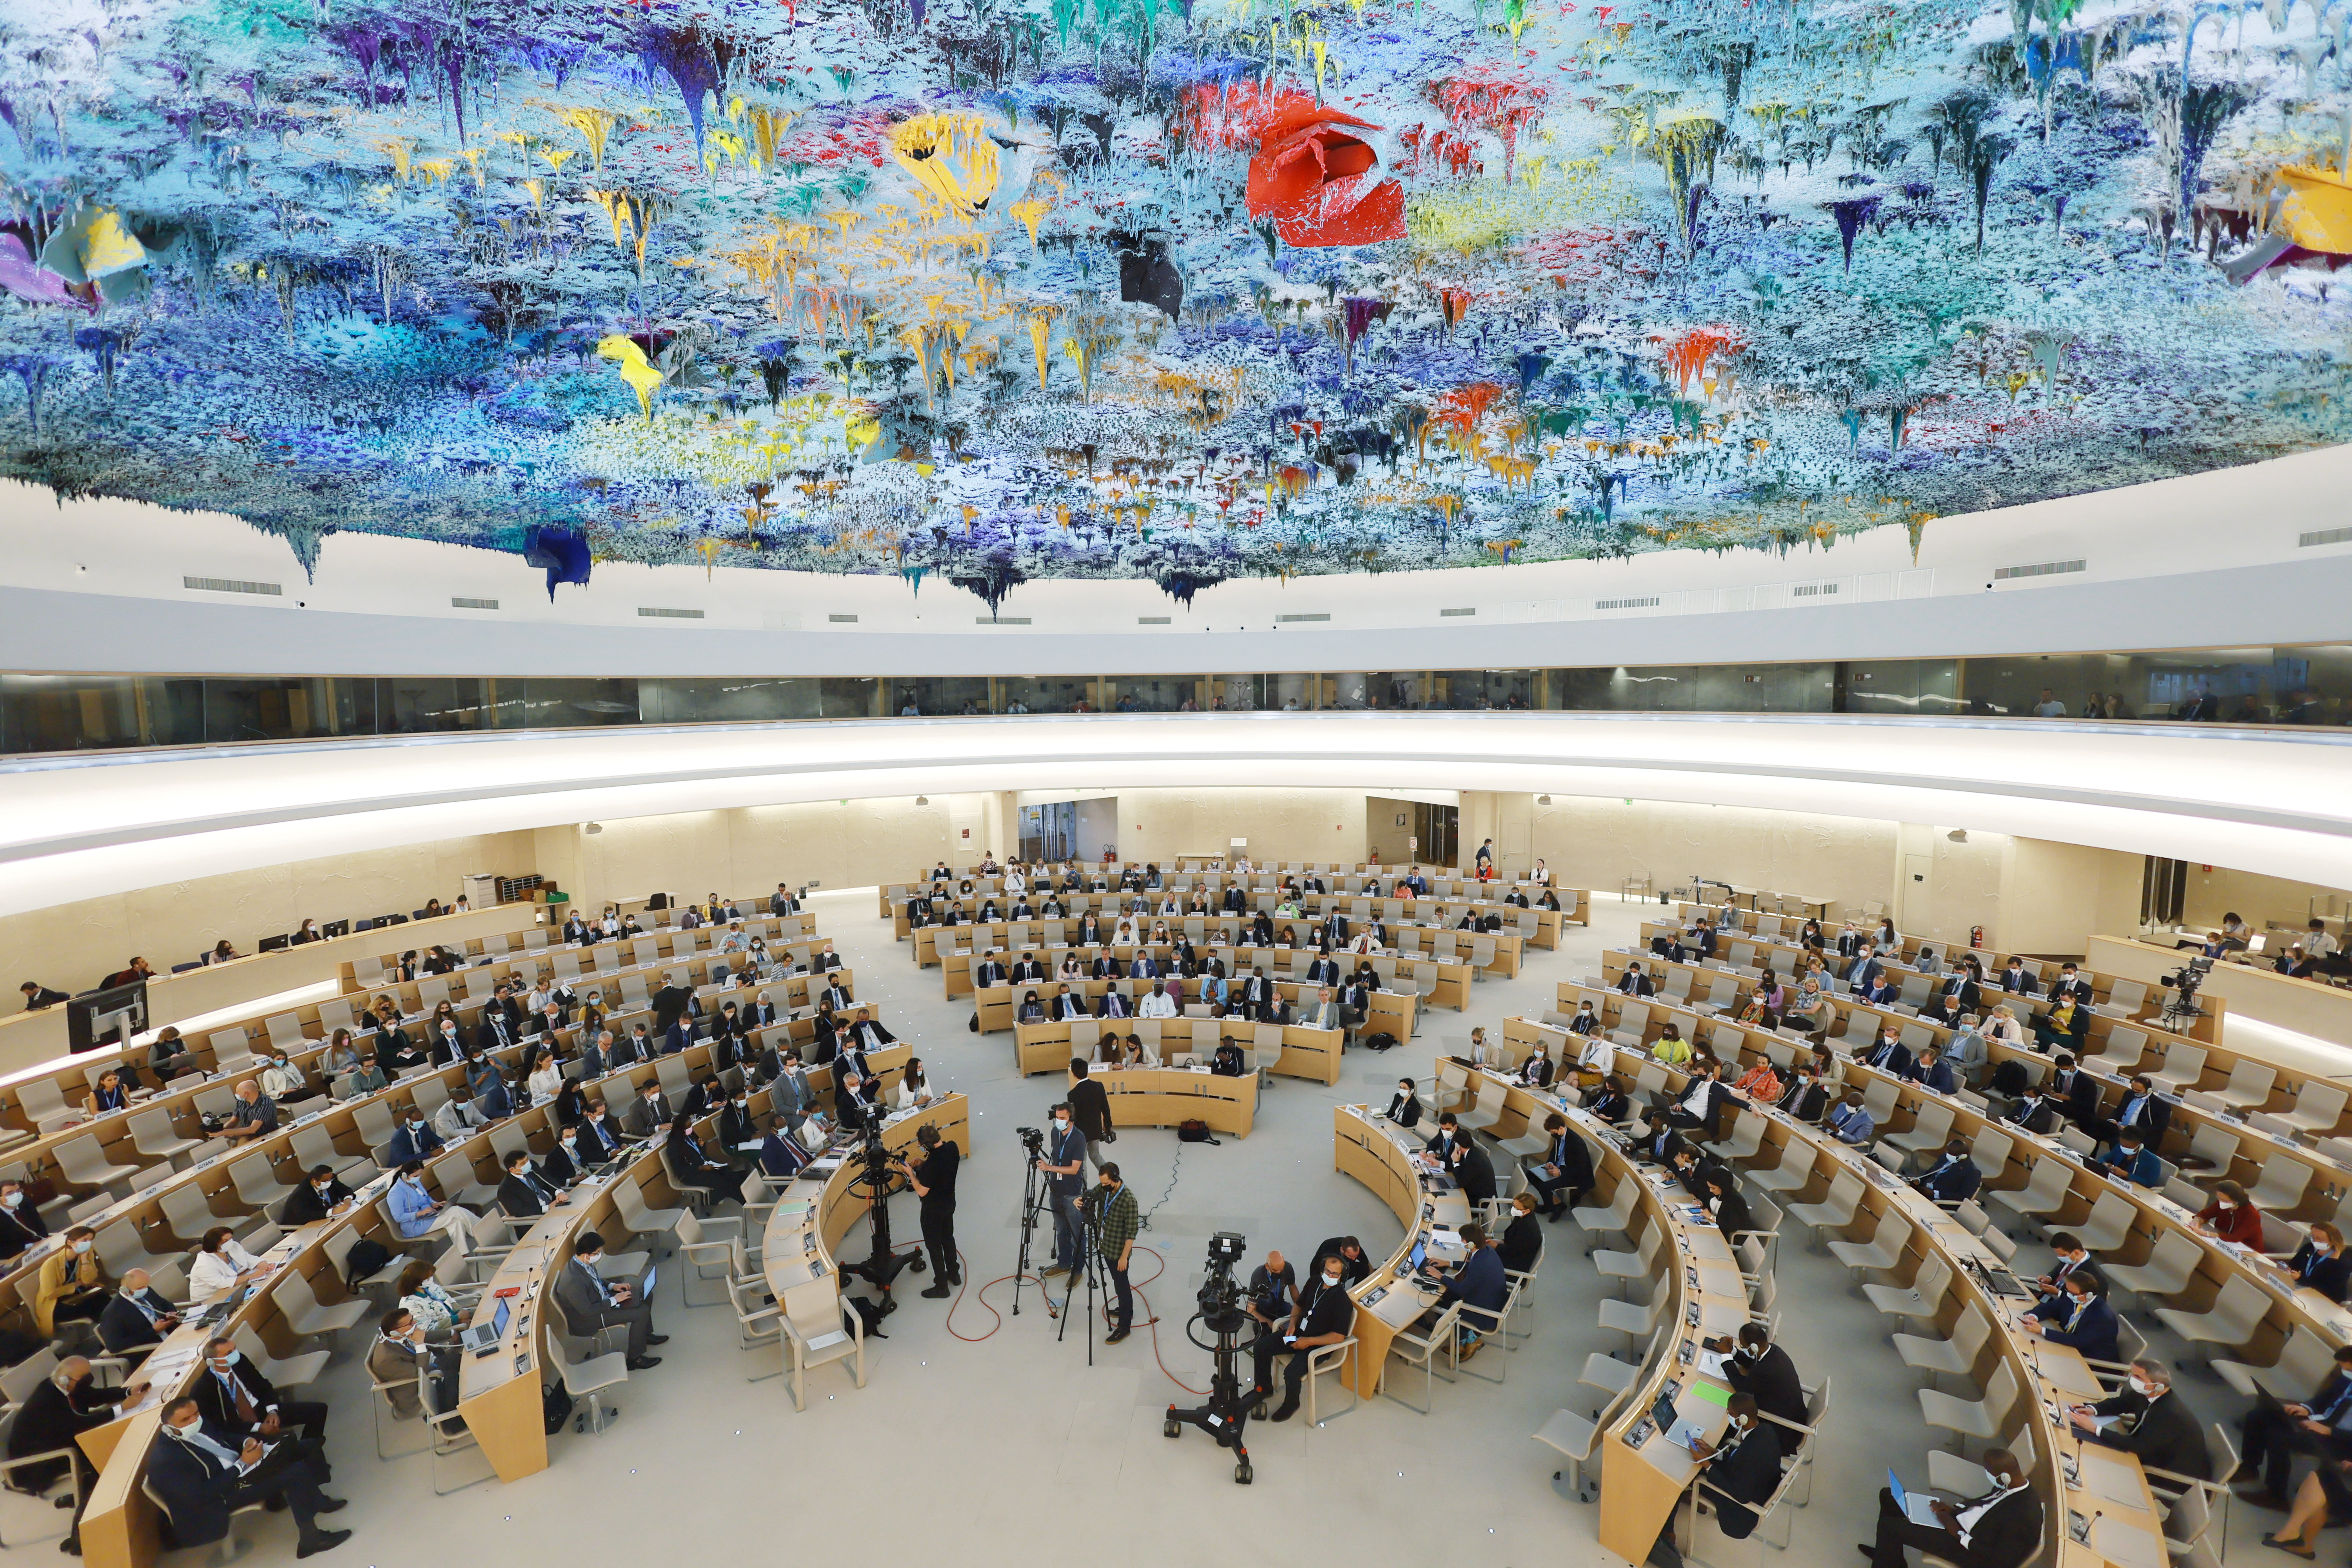 General view of the special session of the Human Rights Council on the situation of human rights in Ukraine, at the United Nations in Geneva, Switzerland, on May 12, 2022. REUTERS/Denis Balibouse